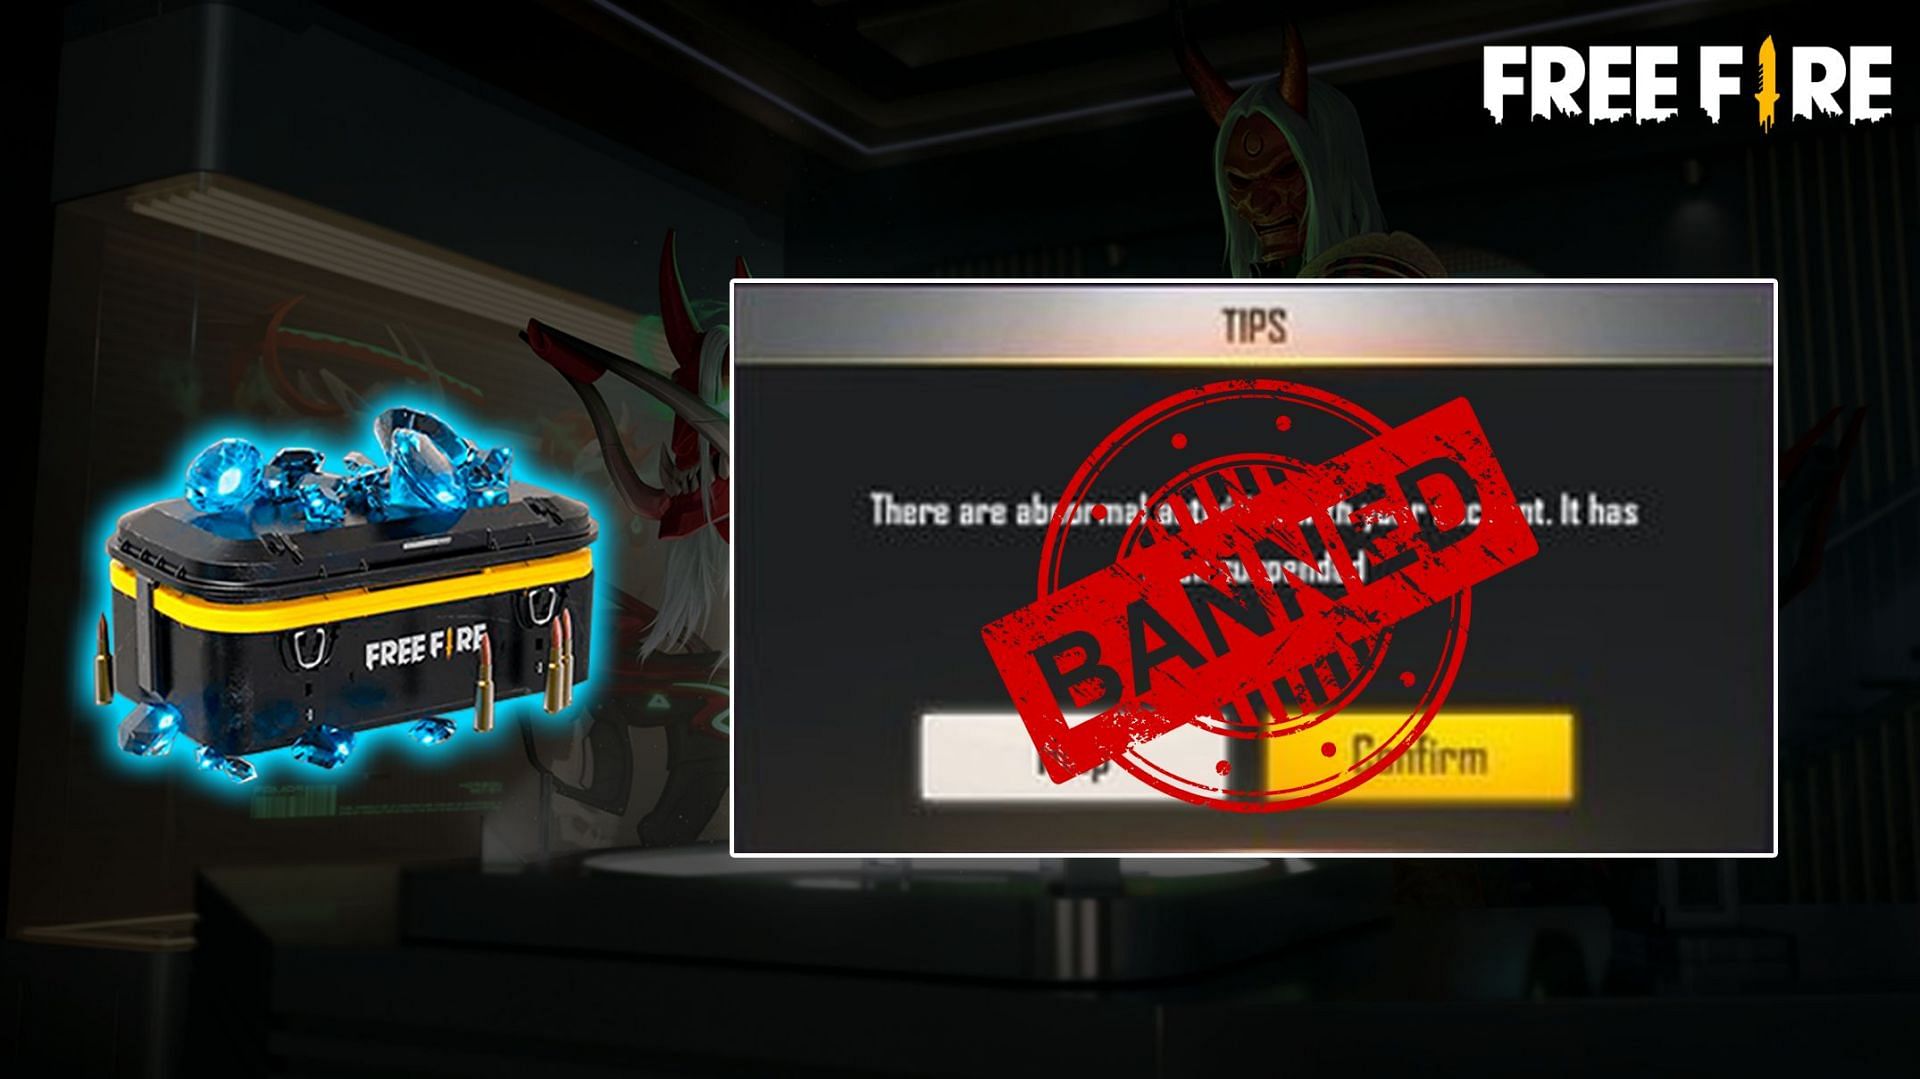 Unlimited Free Fire diamond hacks can lead to ban (Image via Free Fire)